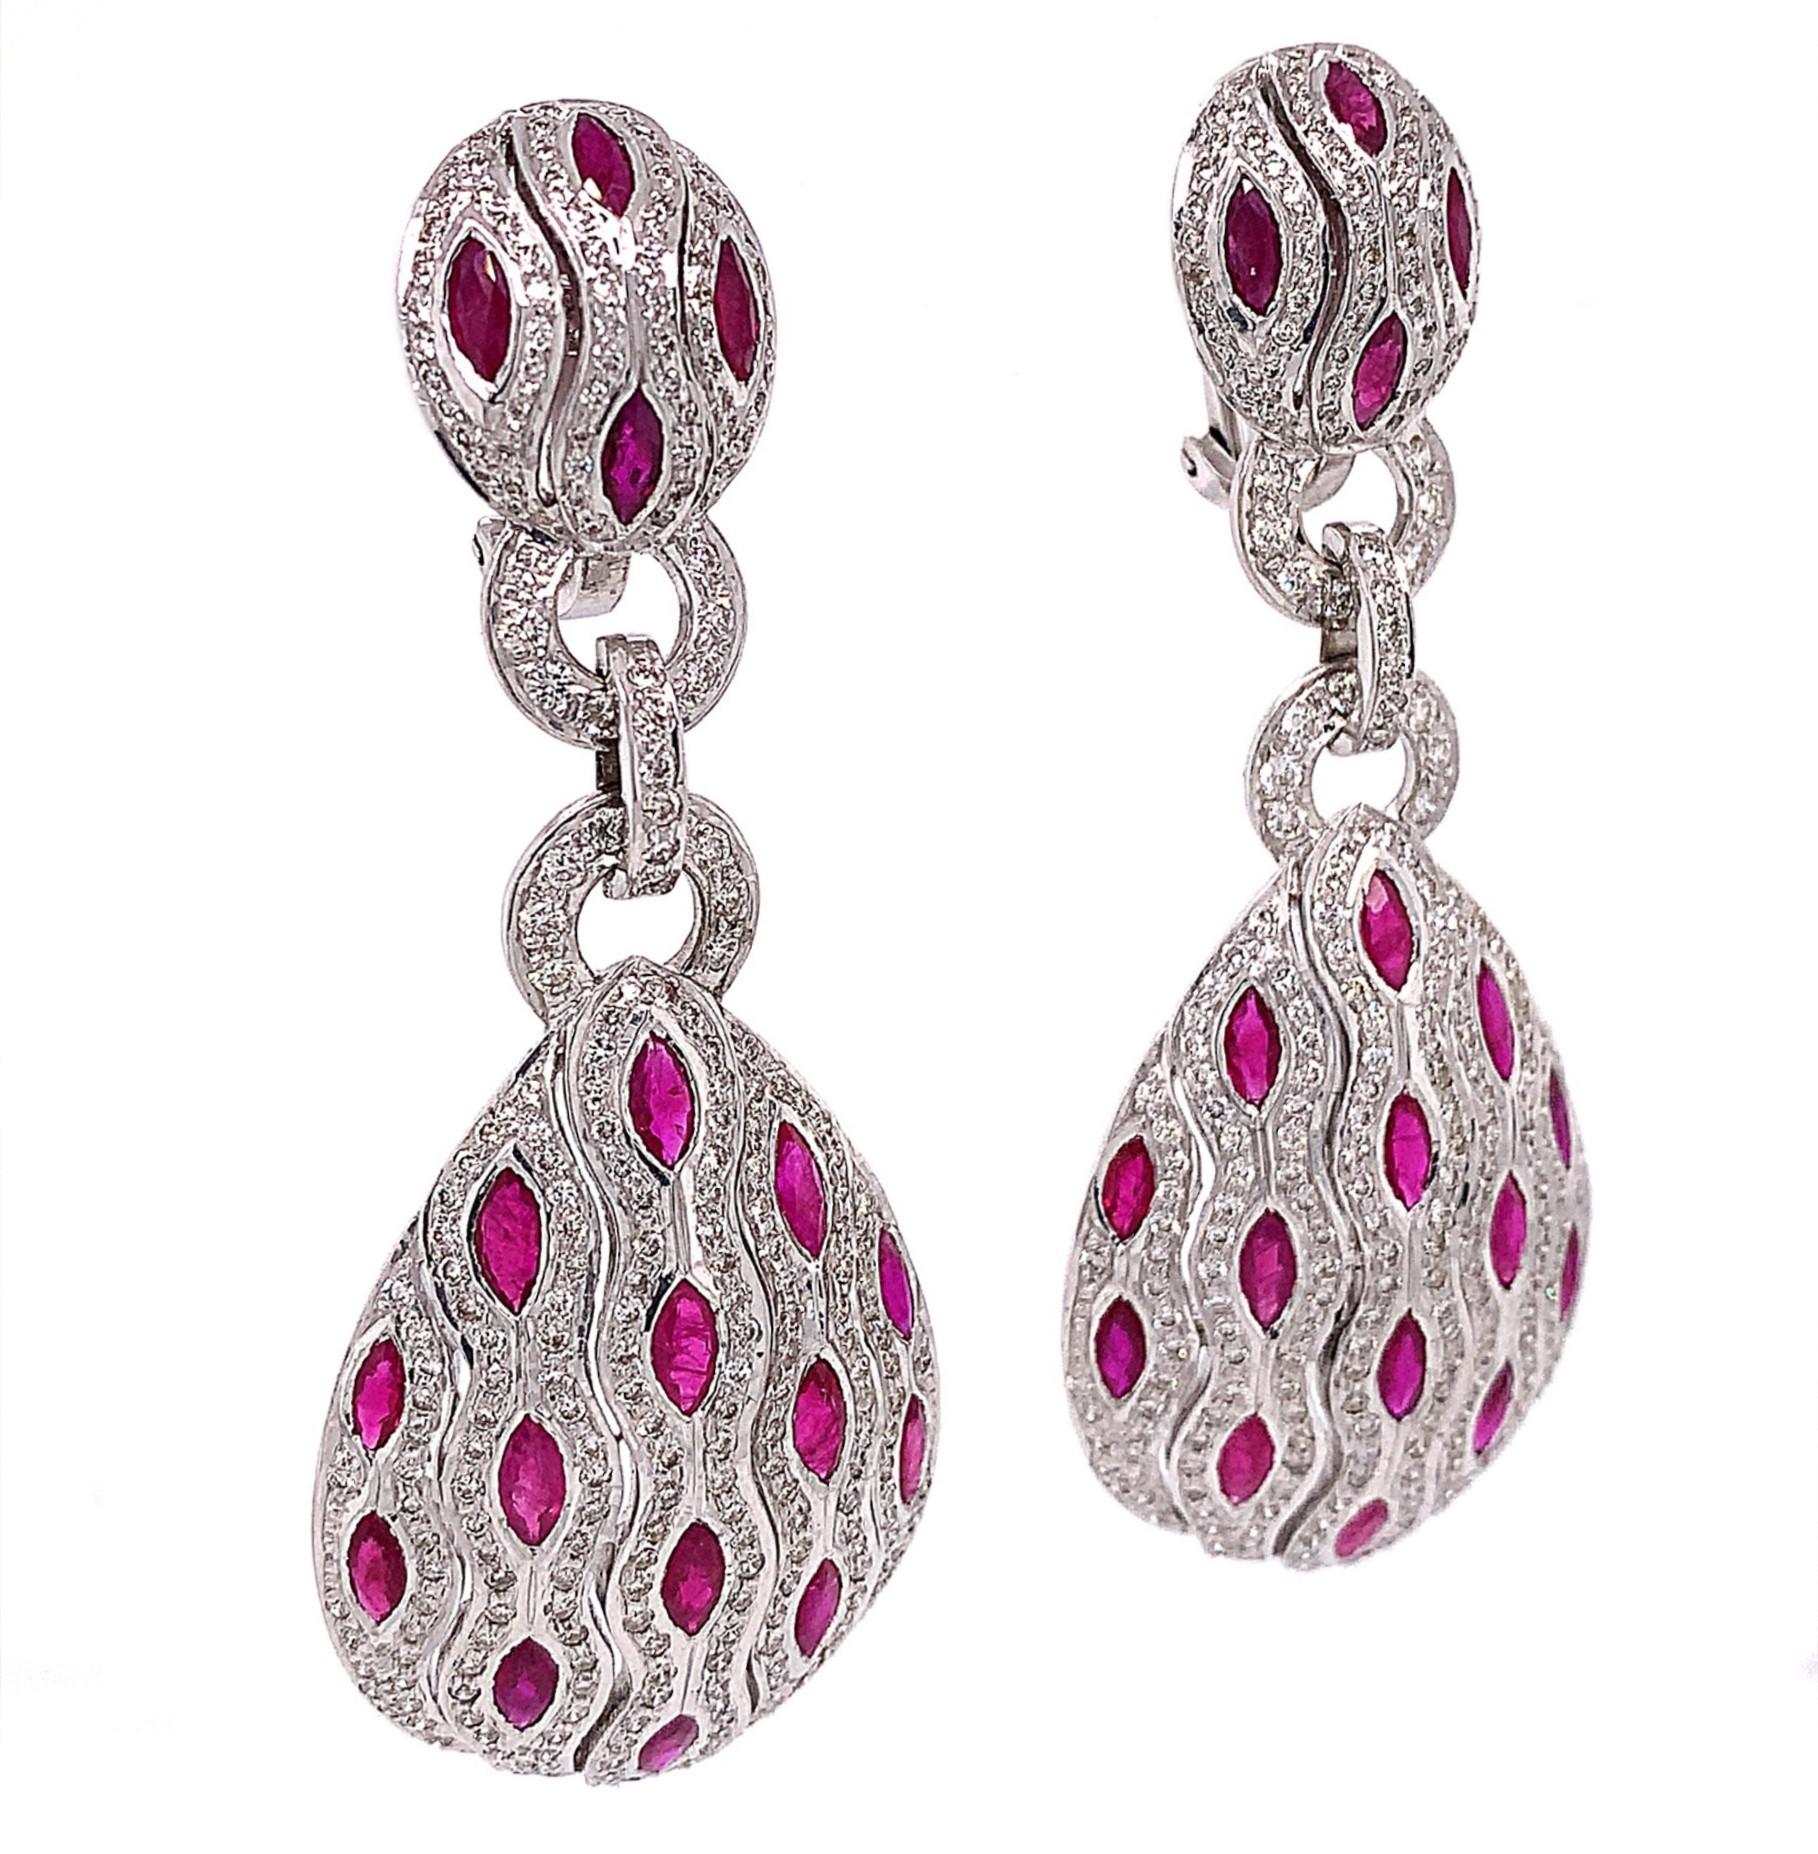 18K White Gold
Ruby: 5.80ct total weight.
Diamond: 3.51ct total weight.
All diamonds are G-H/SI stones.
